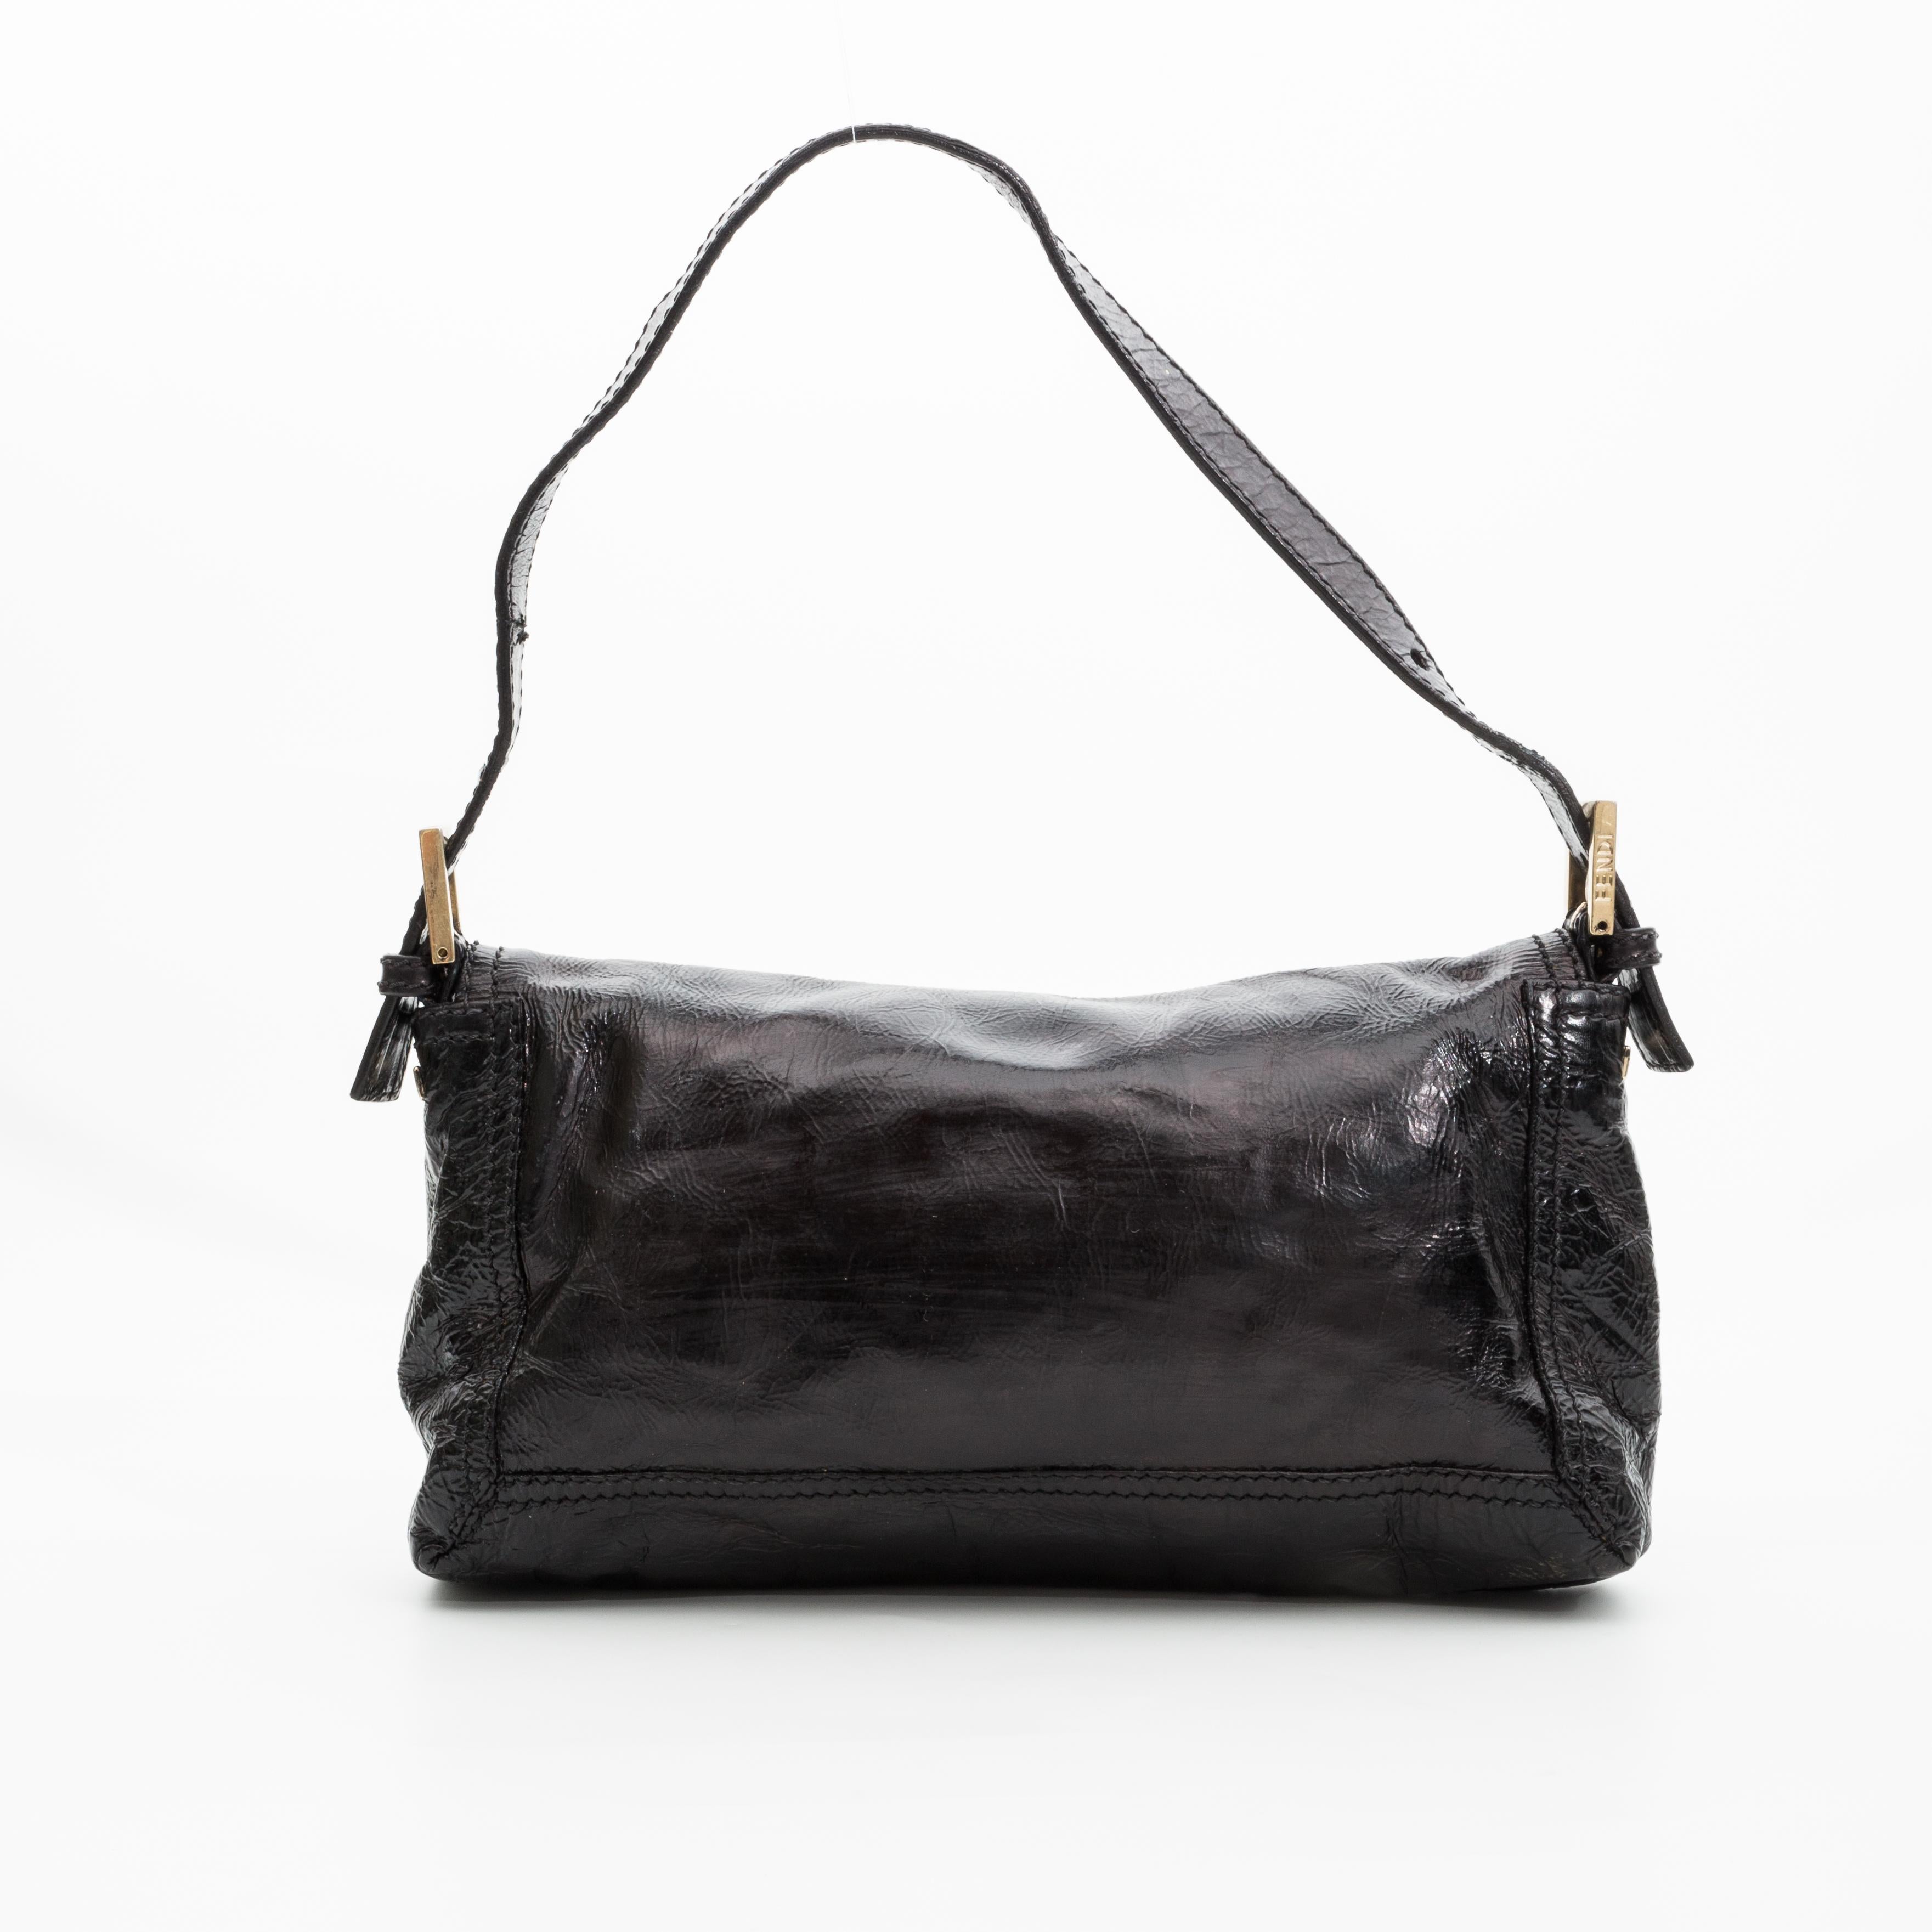 This bag the smaller version of this model.  The bag features textured patent leather, a large Fendi Forever clasp at front flap, snap closure, a removable shoulder strap as this can be worn as a clutch and brown woven fabric interior